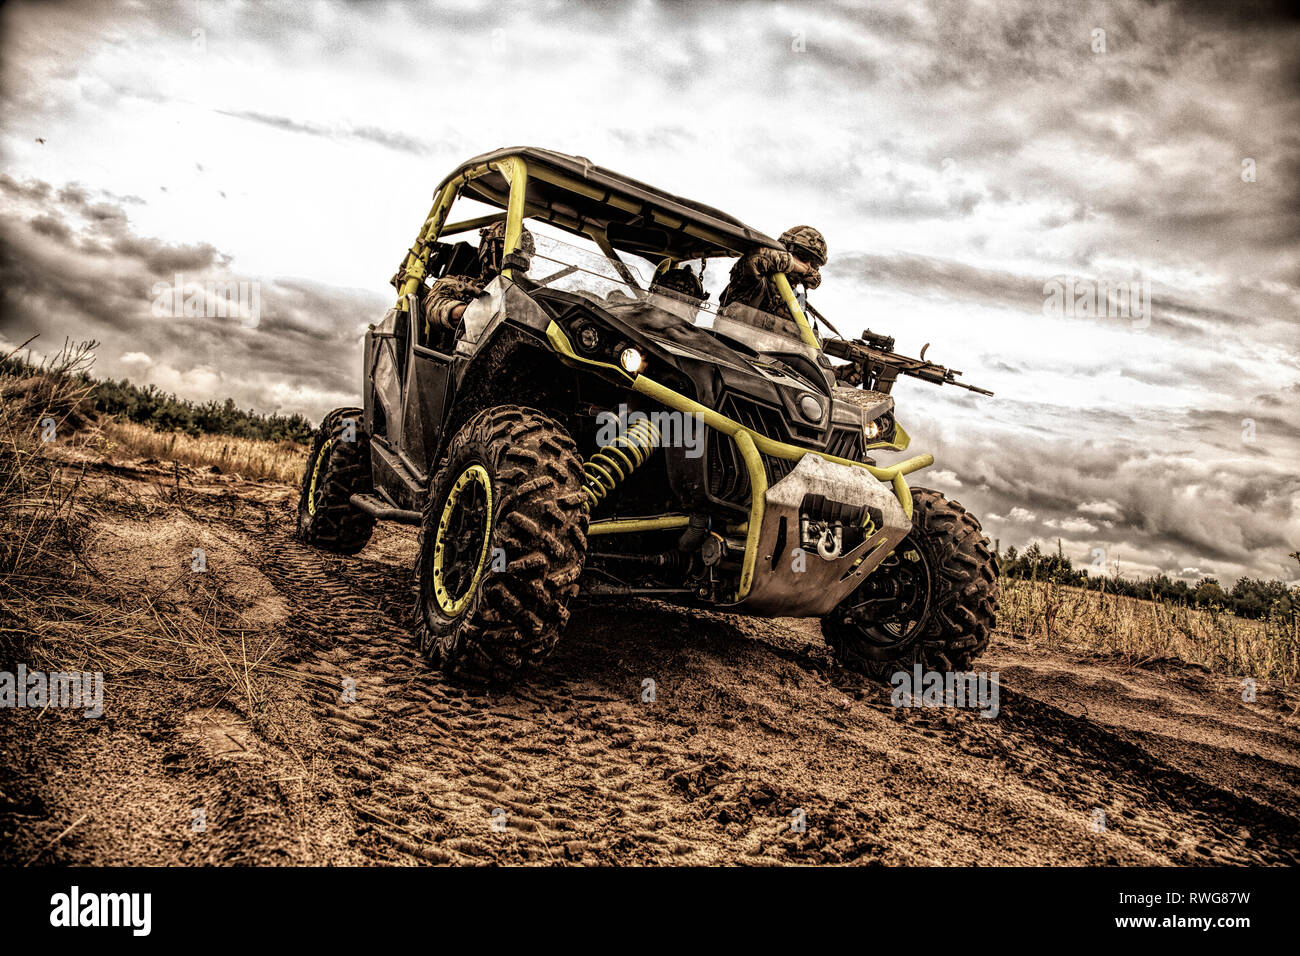 military off road buggy